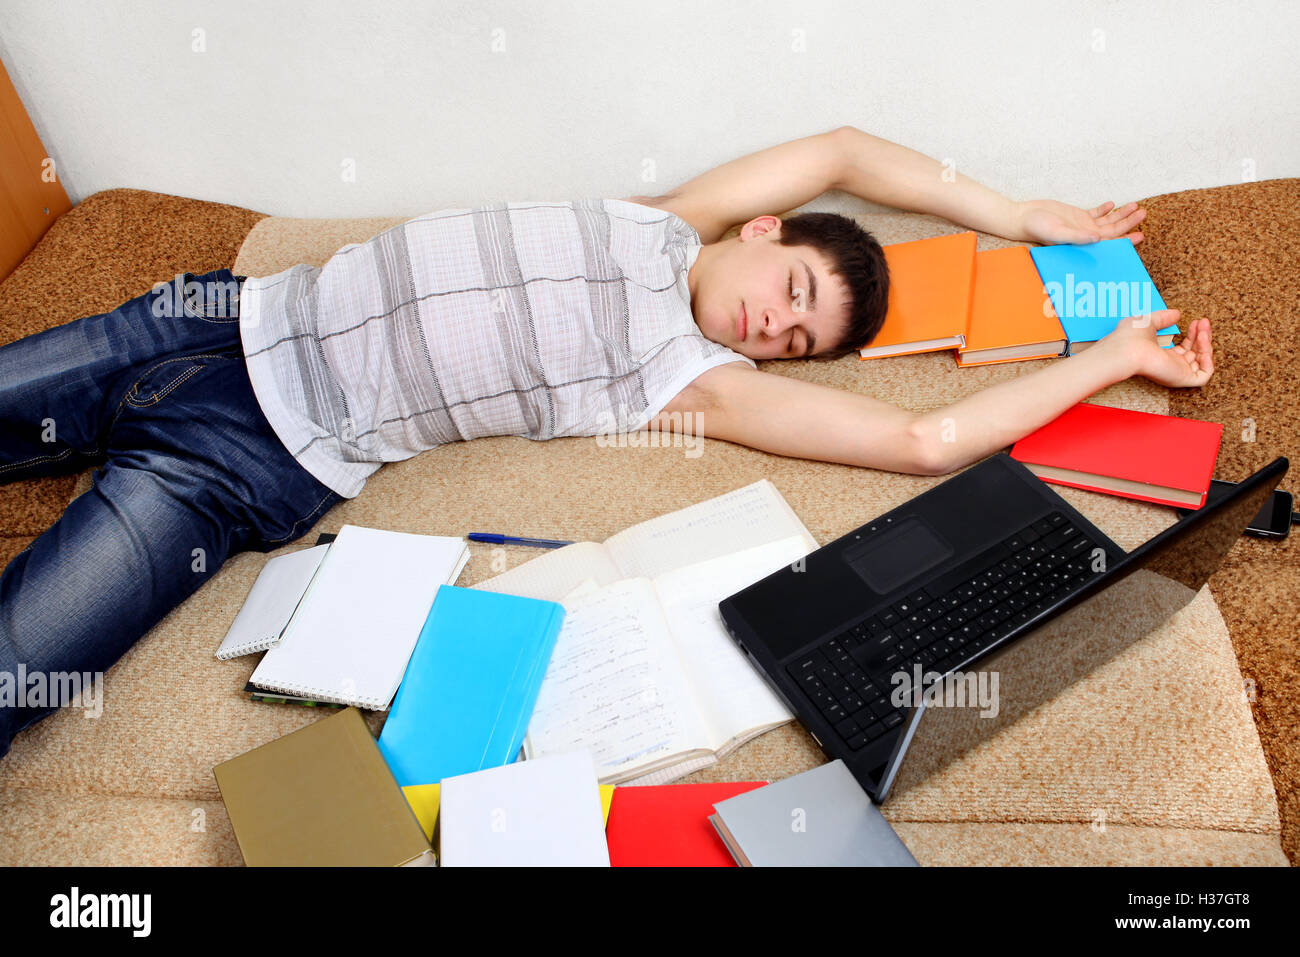 Teenager sleeps after Learning Stock Photo